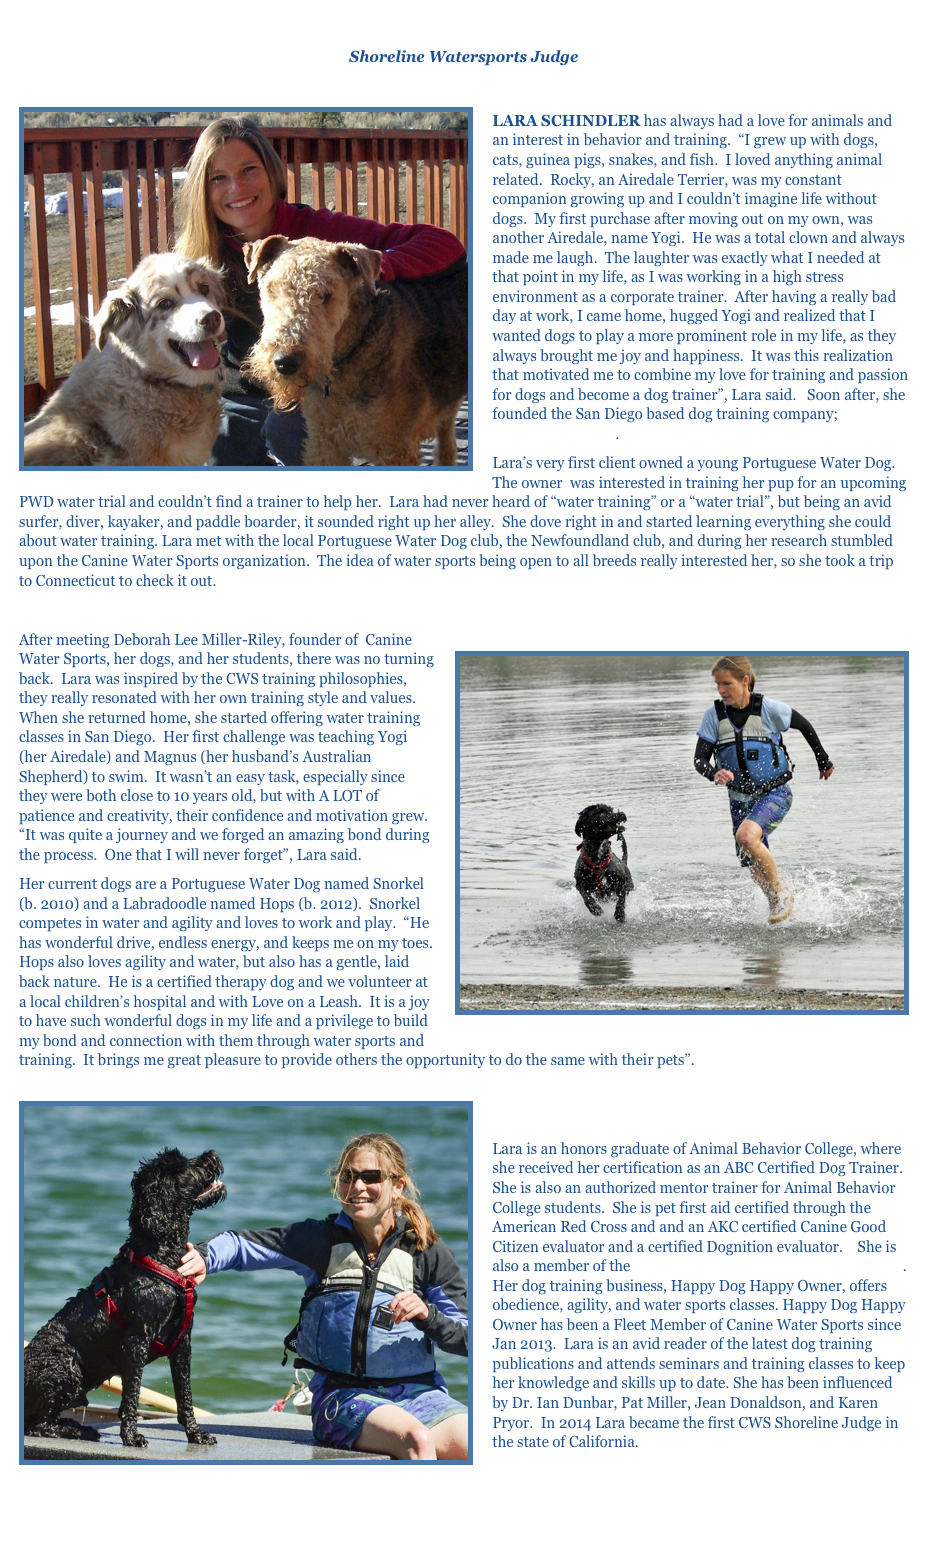 Lara Schindler
Shoreline Watersports Judge

￼
LARA SCHINDLER has always had a love for animals and an interest in behavior and training.  “I grew up with dogs, cats, guinea pigs, snakes, and fish.  I loved anything animal related.  Rocky, an Airedale Terrier, was my constant companion growing up and I couldn’t imagine life without dogs.  My first purchase after moving out on my own, was another Airedale, name Yogi.  He was a total clown and always made me laugh.  The laughter was exactly what I needed at that point in my life, as I was working in a high stress environment as a corporate trainer.  After having a really bad day at work, I came home, hugged Yogi and realized that I wanted dogs to play a more prominent role in my life, as they always brought me joy and happiness.  It was this realization that motivated me to combine my love for training and passion for dogs and become a dog trainer”, Lara said.   Soon after, she founded the San Diego based dog training company; Happy Dog Happy Owner.
Lara’s very first client owned a young Portuguese Water Dog.  The owner  was interested in training her pup for an upcoming PWD water trial and couldn’t find a trainer to help her.  Lara had never heard of “water training” or a “water trial”, but being an avid surfer, diver, kayaker, and paddle boarder, it sounded right up her alley.  She dove right in and started learning everything she could about water training. Lara met with the local Portuguese Water Dog club, the Newfoundland club, and during her research stumbled upon the Canine Water Sports organization.  The idea of water sports being open to all breeds really interested her, so she took a trip to Connecticut to check it out.

￼After meeting Deborah Lee Miller-Riley, founder of  Canine Water Sports, her dogs, and her students, there was no turning back.  Lara was inspired by the CWS training philosophies, they really resonated with her own training style and values.  When she returned home, she started offering water training classes in San Diego.  Her first challenge was teaching Yogi (her Airedale) and Magnus (her husband’s Australian Shepherd) to swim.  It wasn’t an easy task, especially since they were both close to 10 years old, but with A LOT of patience and creativity, their confidence and motivation grew.  “It was quite a journey and we forged an amazing bond during the process.  One that I will never forget”, Lara said.
Her current dogs are a Portuguese Water Dog named Snorkel (b. 2010) and a Labradoodle named Hops (b. 2012).  Snorkel competes in water and agility and loves to work and play.  “He has wonderful drive, endless energy, and keeps me on my toes.  Hops also loves agility and water, but also has a gentle, laid back nature.  He is a certified therapy dog and we volunteer at a local children’s hospital and with Love on a Leash.  It is a joy to have such wonderful dogs in my life and a privilege to build my bond and connection with them through water sports and training.  It brings me great pleasure to provide others the opportunity to do the same with their pets”.  
￼

Lara is an honors graduate of Animal Behavior College, where she received her certification as an ABC Certified Dog Trainer.  She is also an authorized mentor trainer for Animal Behavior College students.  She is pet first aid certified through the American Red Cross and and an AKC certified Canine Good Citizen evaluator and a certified Dognition evaluator.    She is also a member of the Association of Professional Dog Trainers.  Her dog training business, Happy Dog Happy Owner, offers obedience, agility, and water sports classes. Happy Dog Happy Owner has been a Fleet Member of Canine Water Sports since Jan 2013.  Lara is an avid reader of the latest dog training publications and attends seminars and training classes to keep her knowledge and skills up to date. She has been influenced by Dr. Ian Dunbar, Pat Miller, Jean Donaldson, and Karen Pryor.  In 2014 Lara became the first CWS Shoreline Judge in the state of California.



